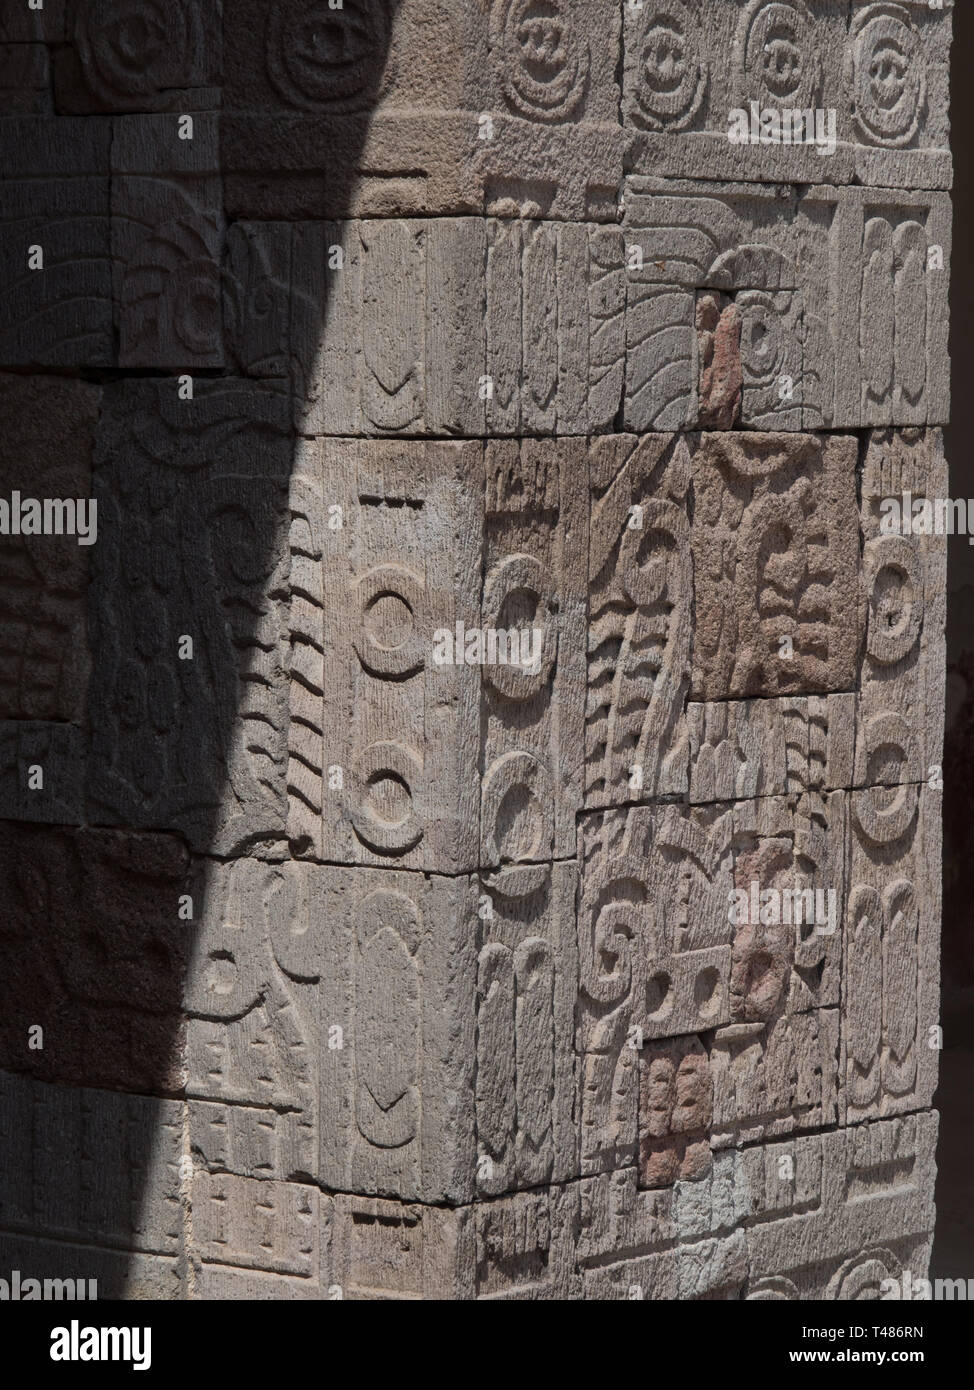 Intricate carvings on stone walls at Teotihuacan Stock Photo